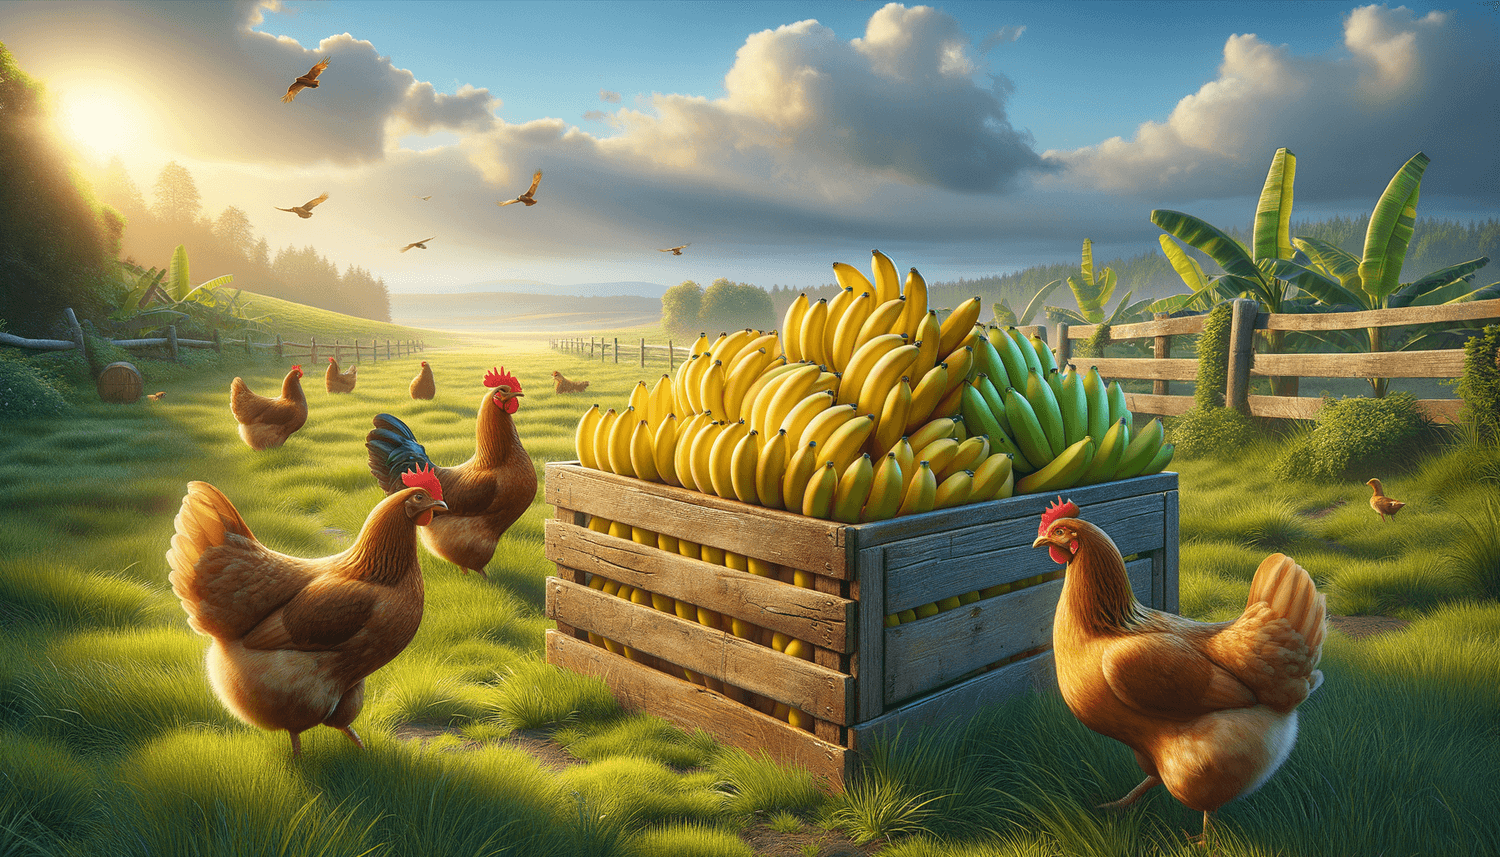 Can Chickens Eat Bananas?